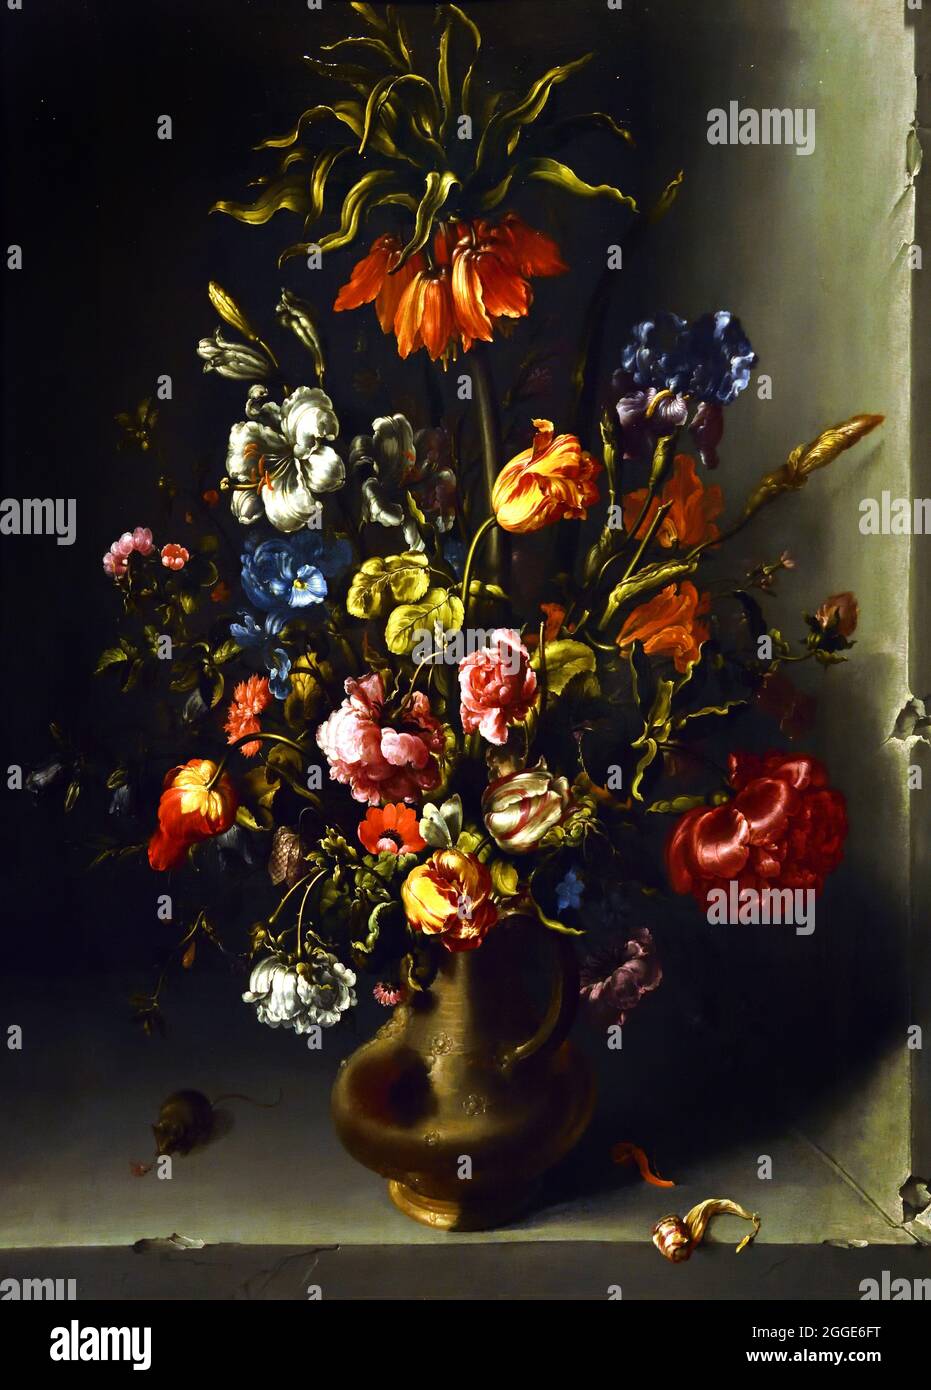 Flower Still Life with an Imperial Crown in a Stone Niche, 1613 Jacob Vosmaer 1584-1641, Oil paint on panel, Dutch, The Netherlands. Stock Photo